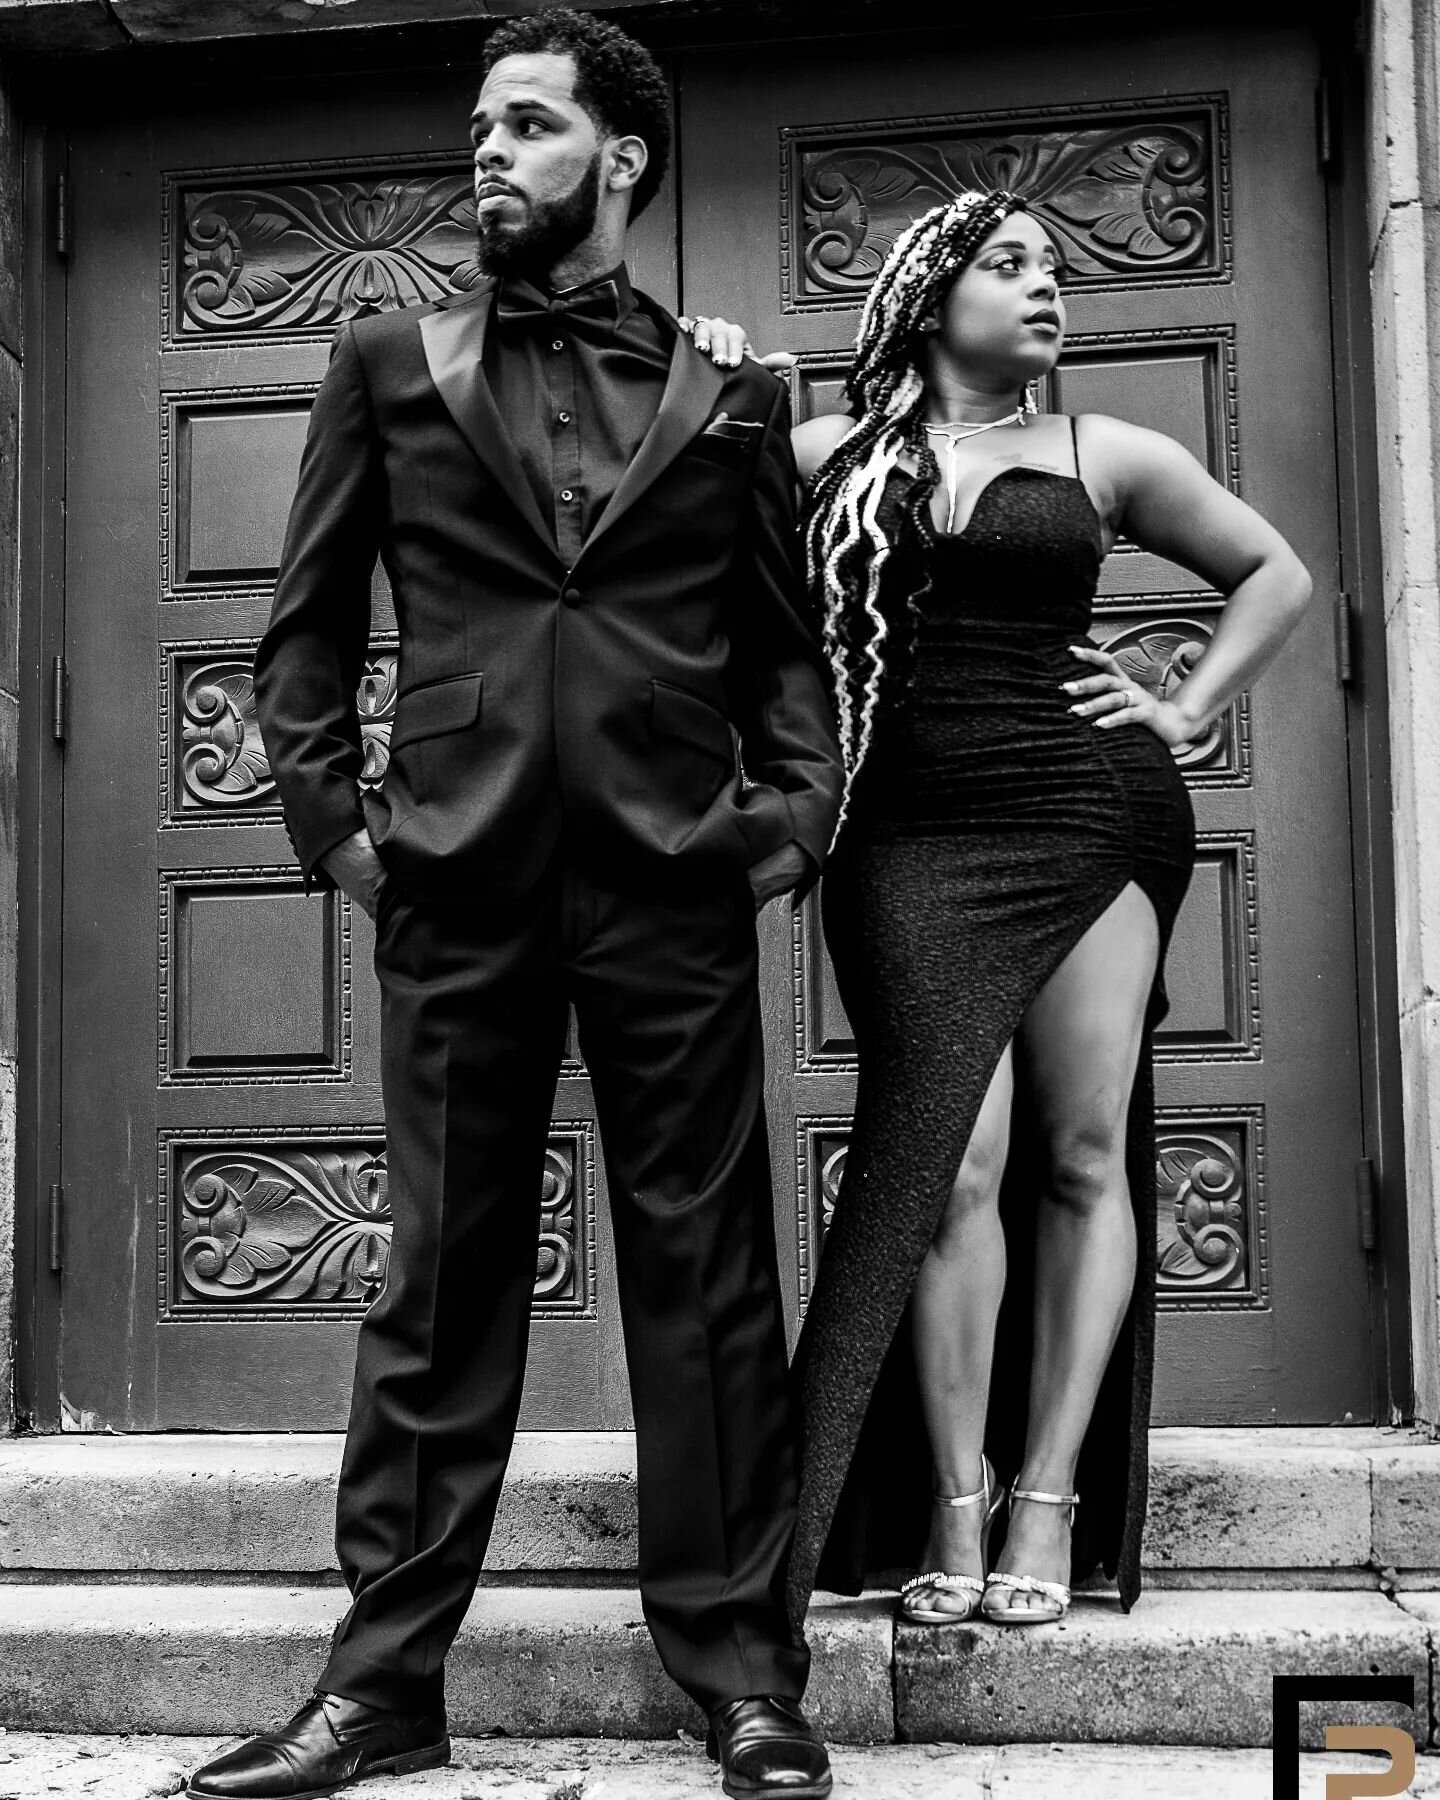 Book your couples session today!

#dfwphotographer #dallasphotographer #dfwmodels #dallasmodels #fashionphotography #fashionphotog #couples #melaninpoppin #nikon #z9